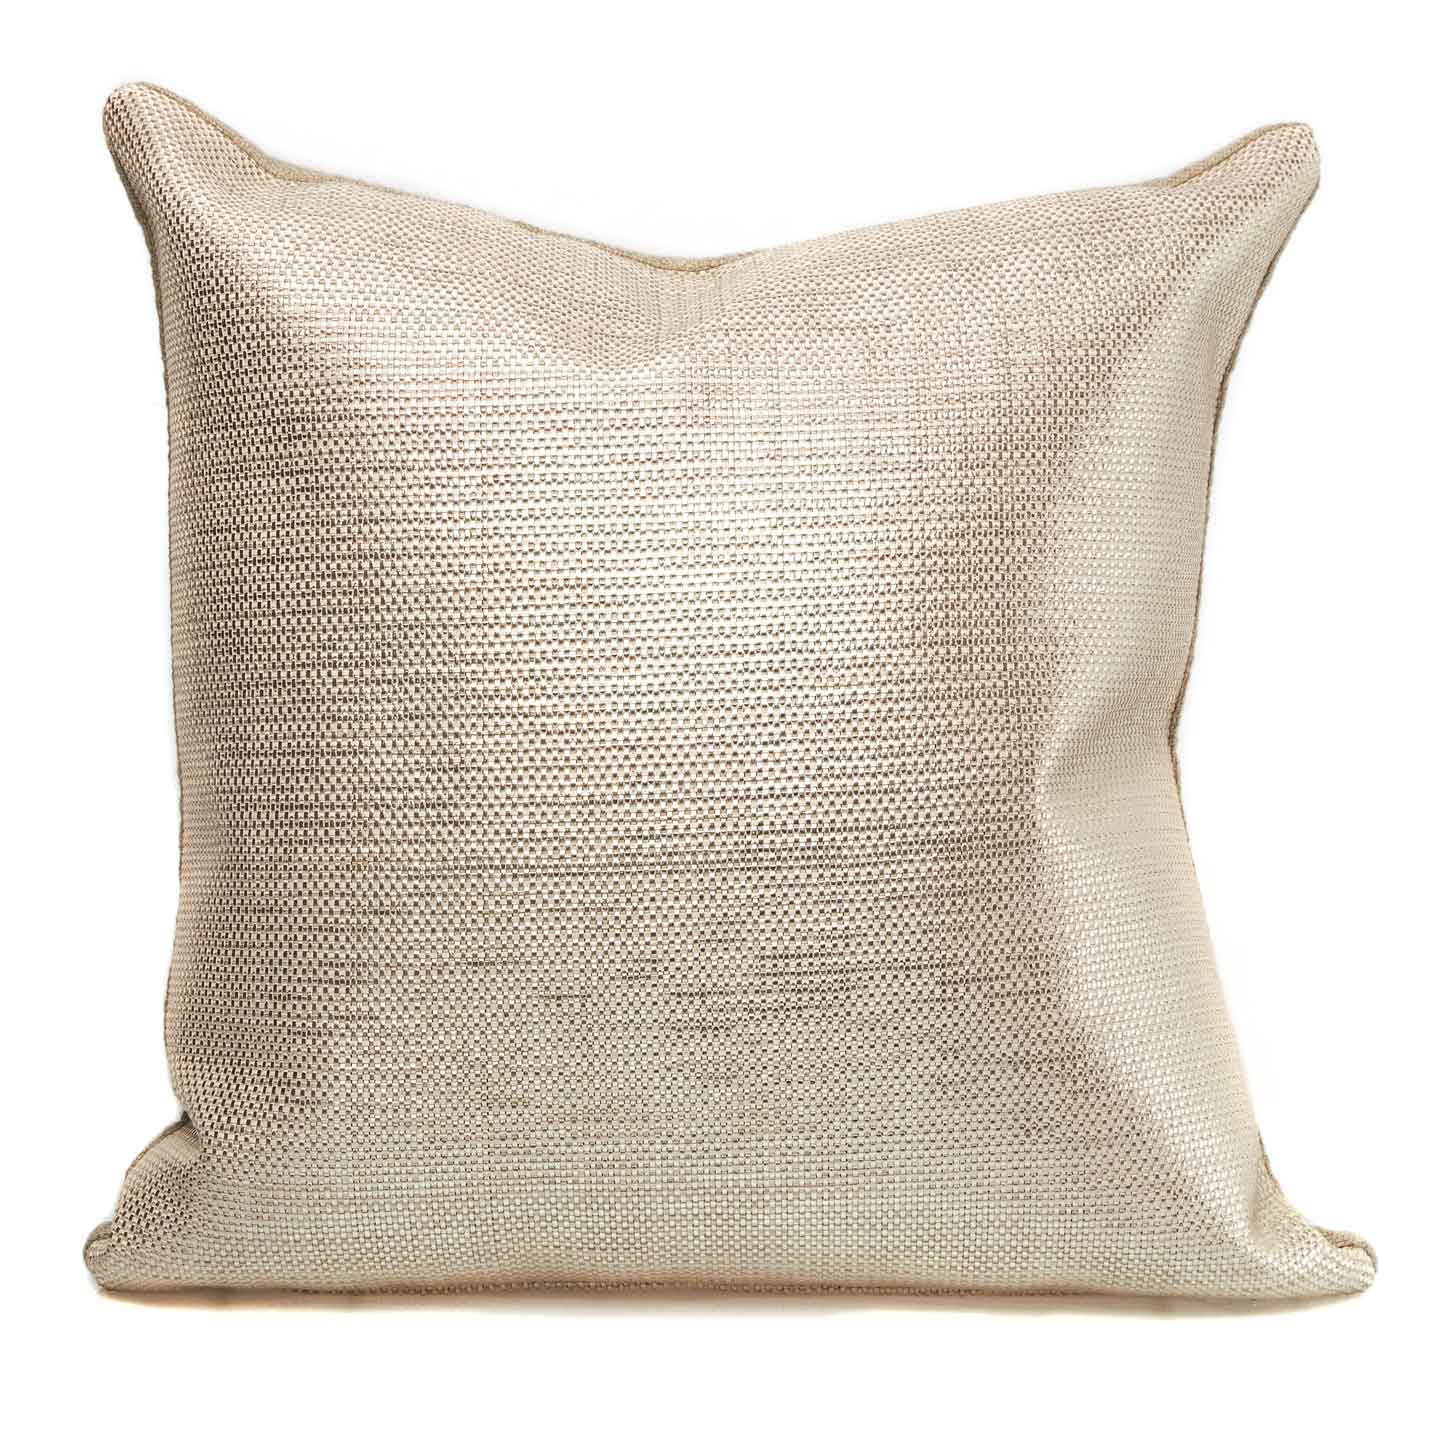 The Maya pillow by Beau Home